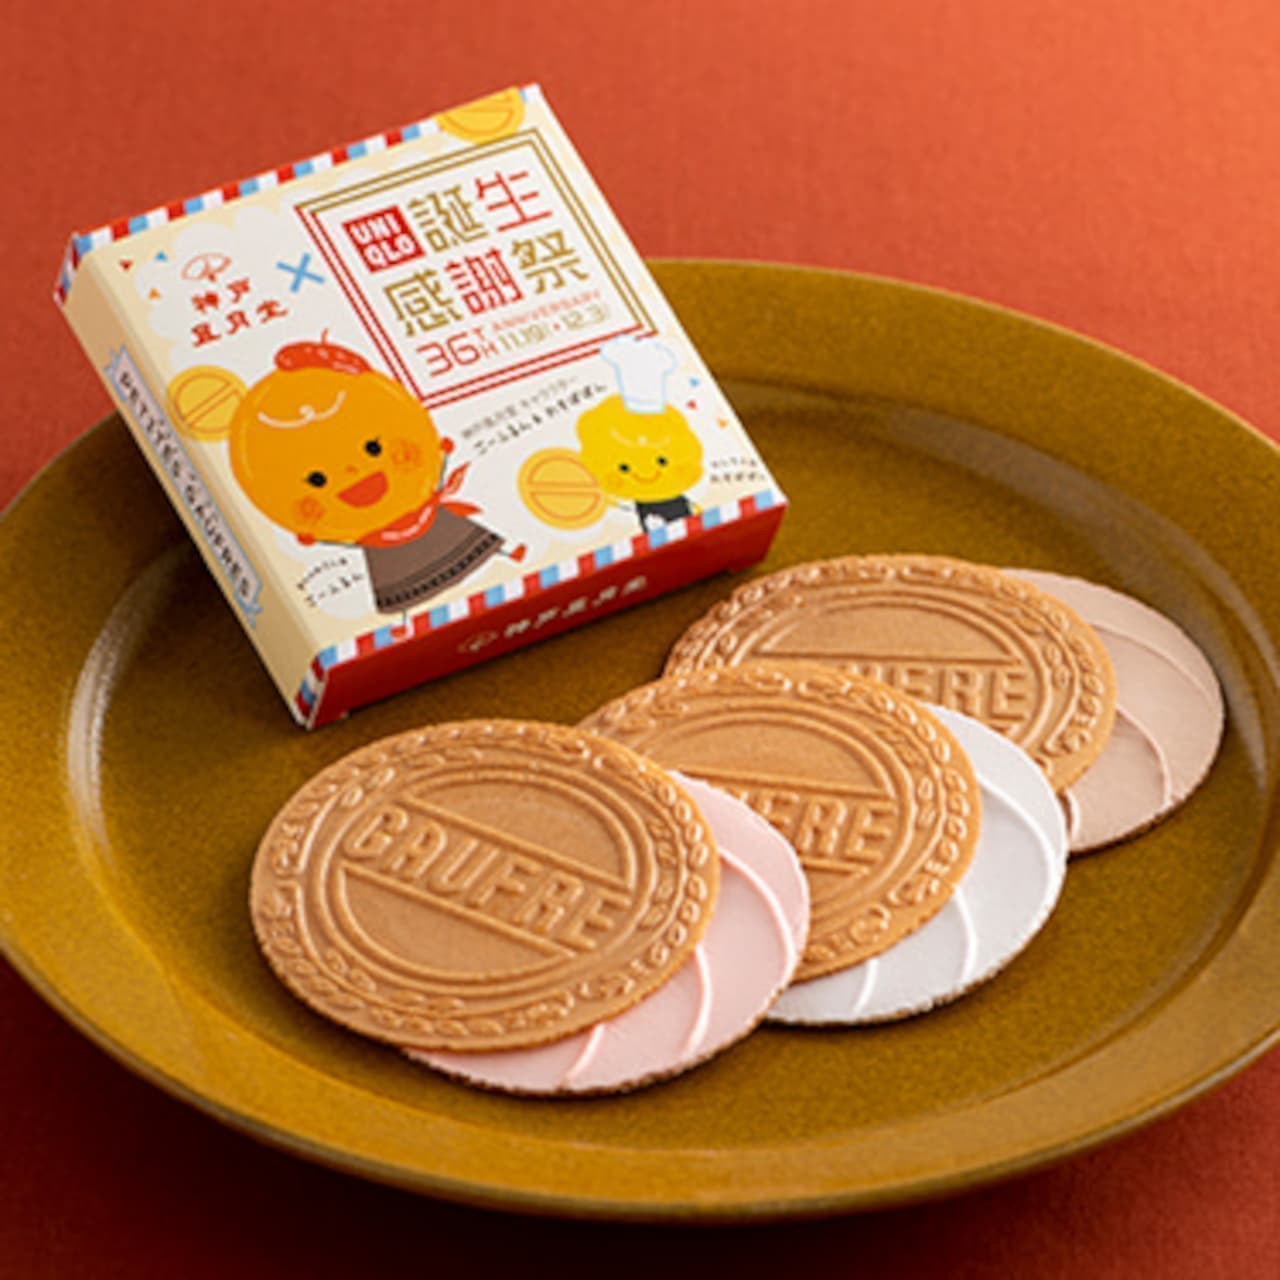 UNIQLO to Present Local Confections from 47 Prefectures in Japan